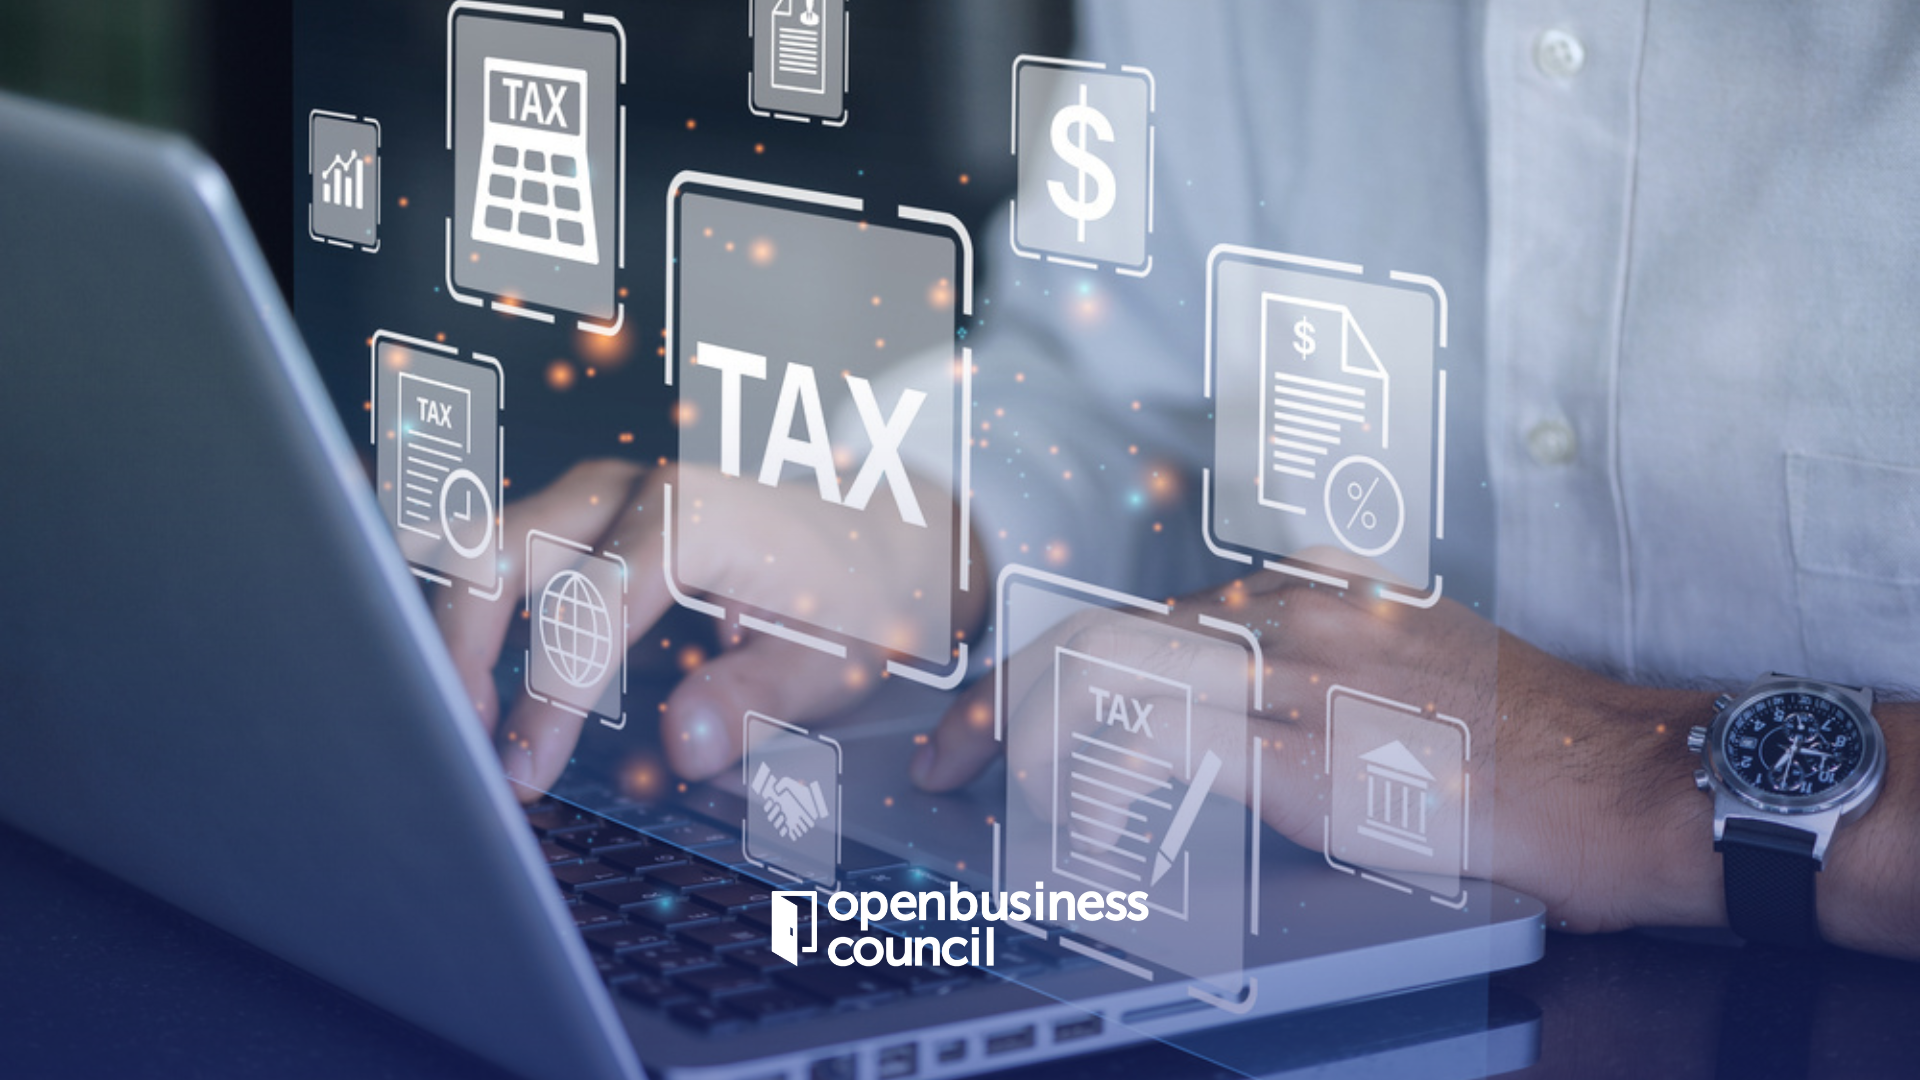 5 Steps To Digitalize Your Tax Process